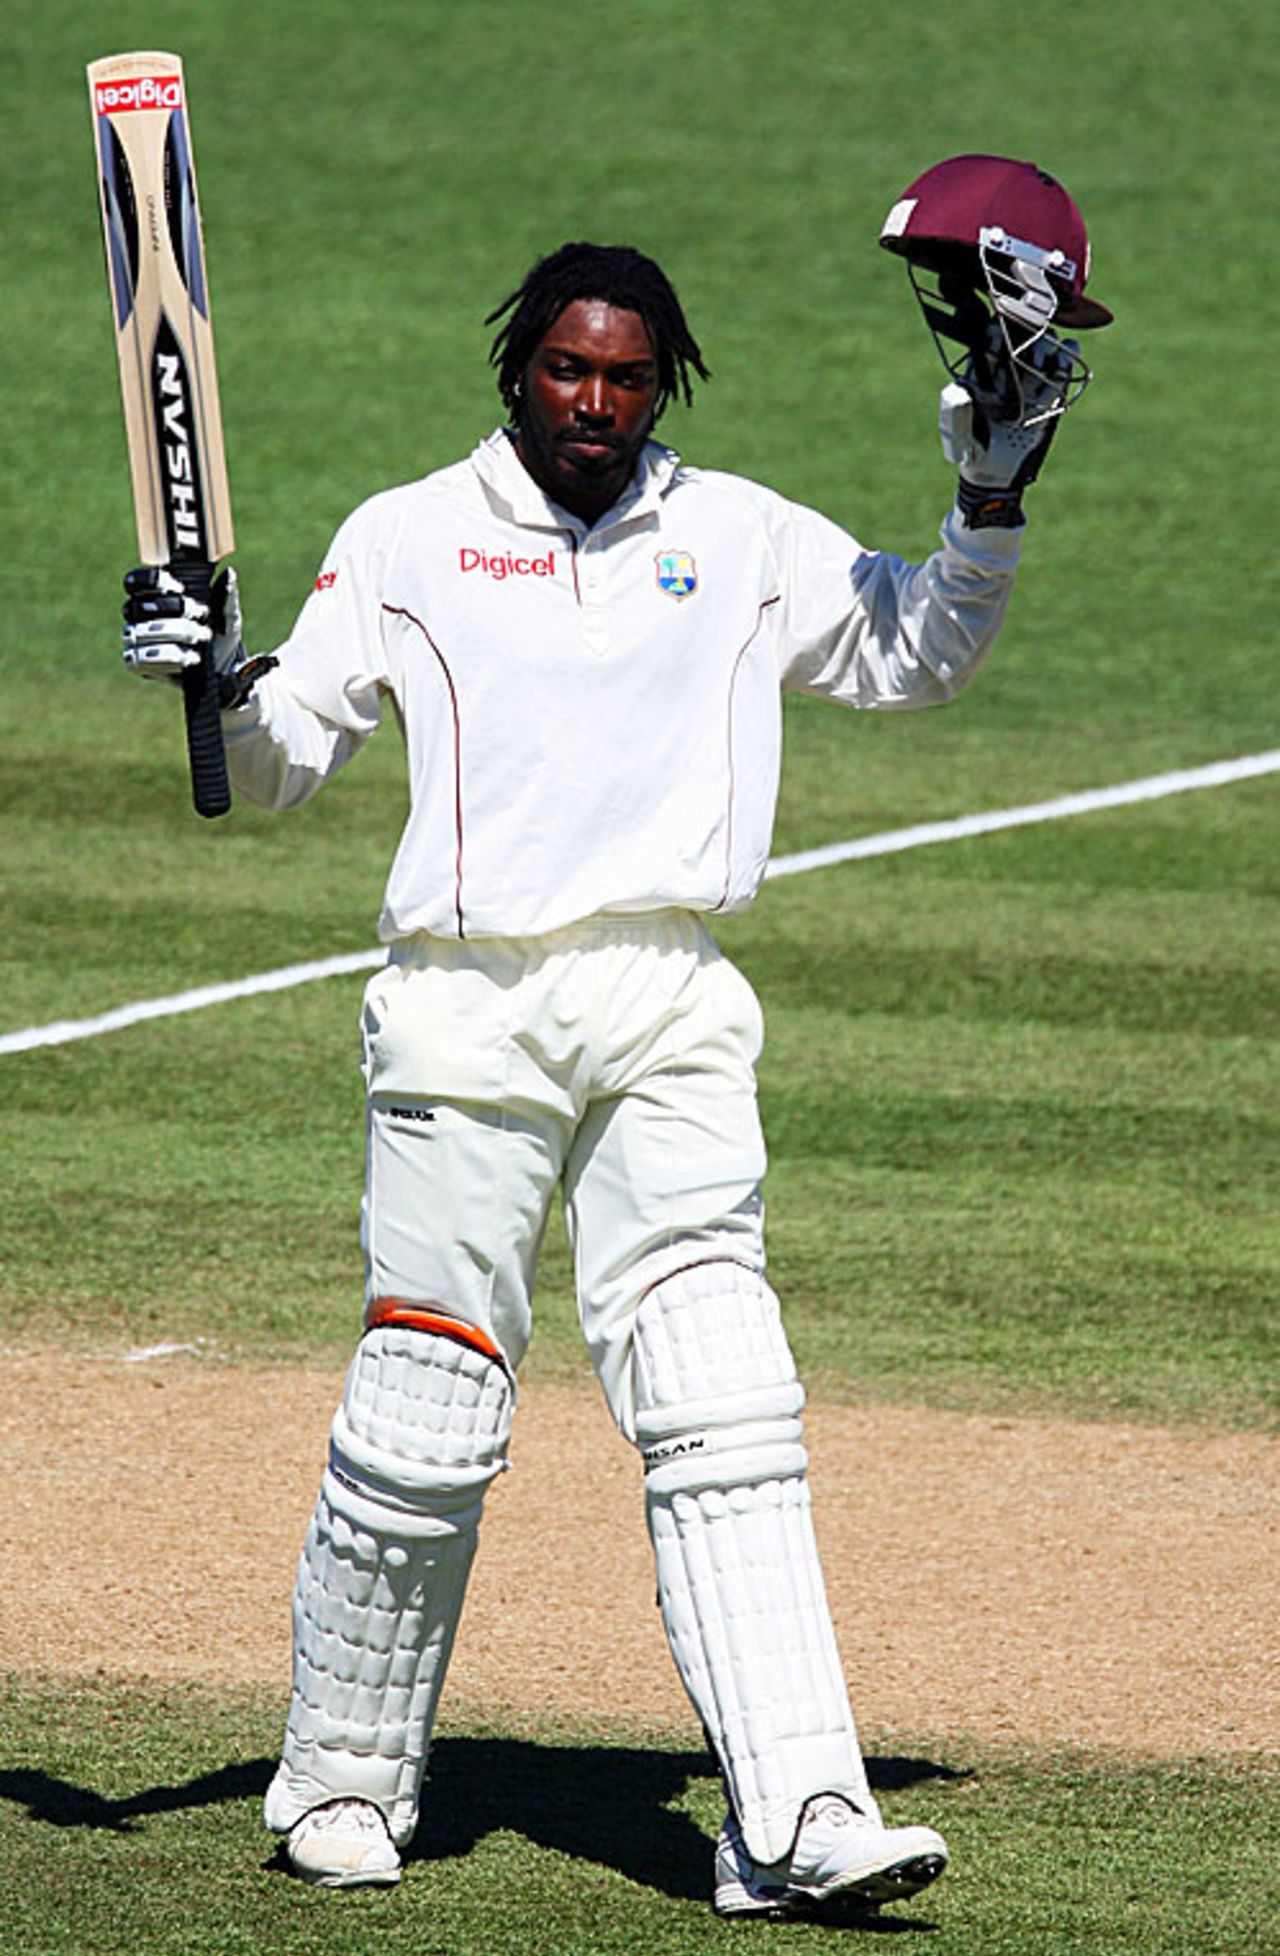 Chris Gayle reaches his eighth Test century, New Zealand v West Indies, 2nd Test, Napier, 4th day, December 22, 2008